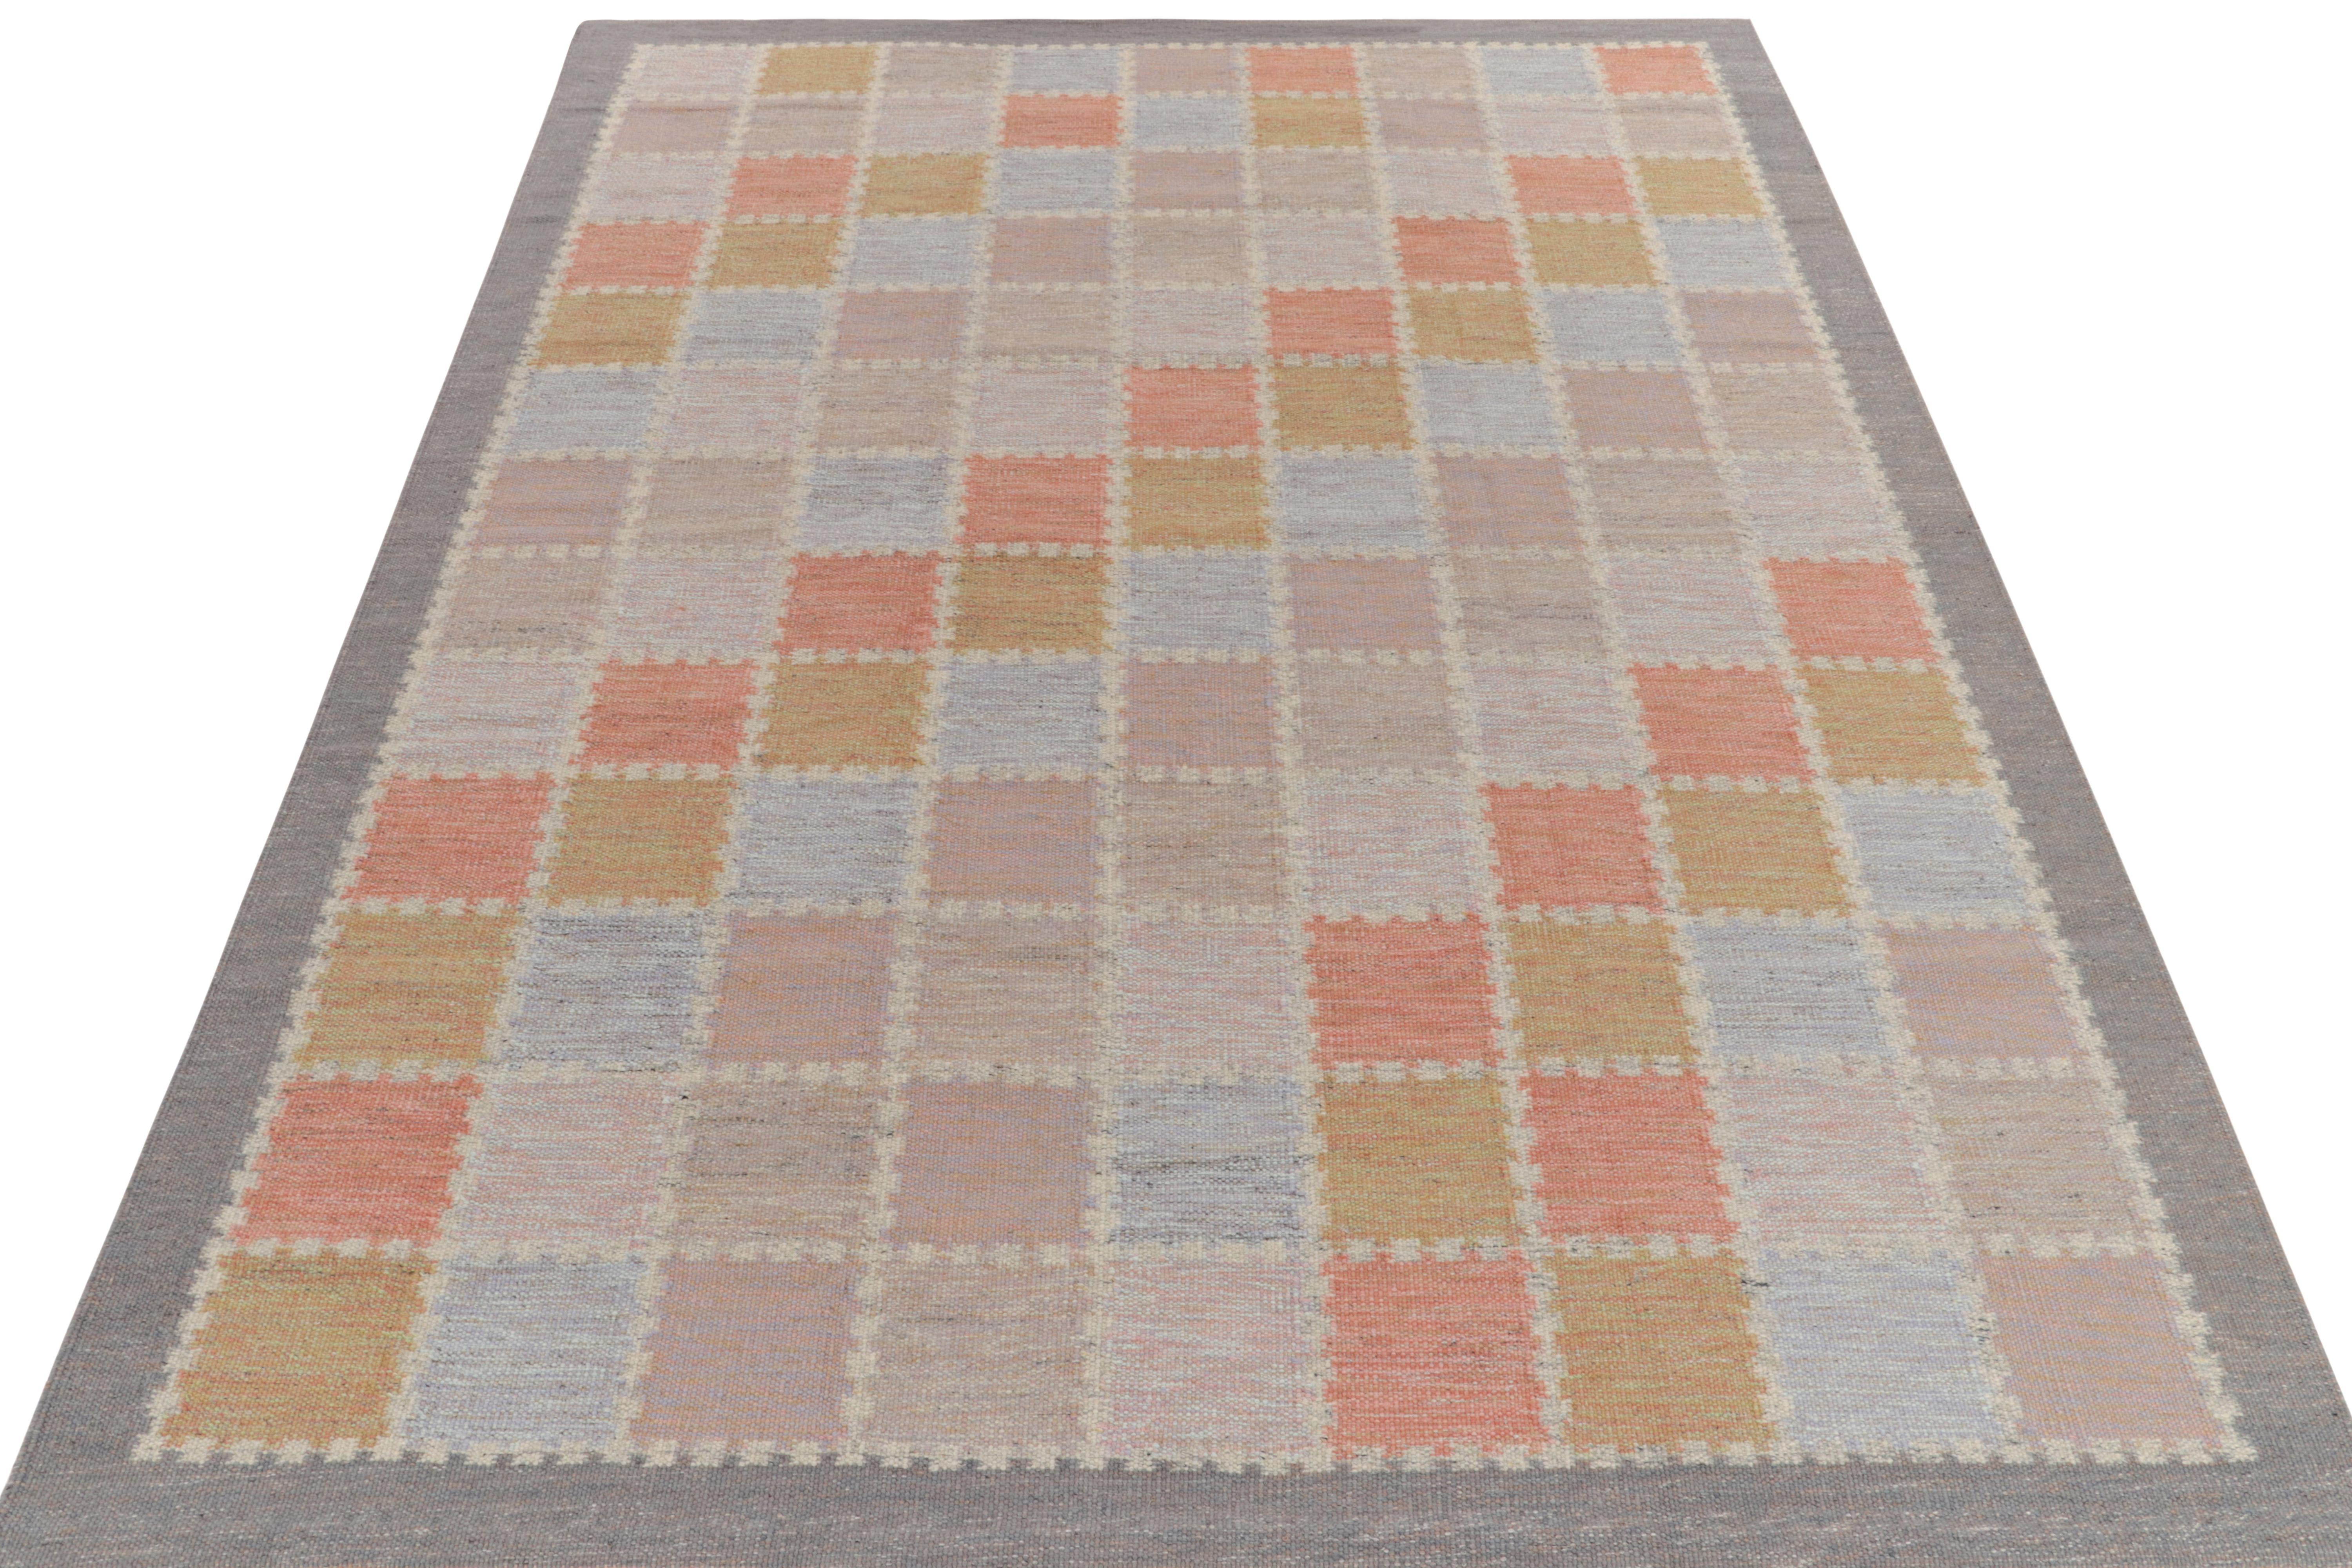 Handwoven in wool, a smart Scandinavian style kilim rug design from our award-winning flatweave selections of the titular custom collection. This former 9x12 exemplifies a symmetric geometric pattern in alternating tones of handsome gray, light